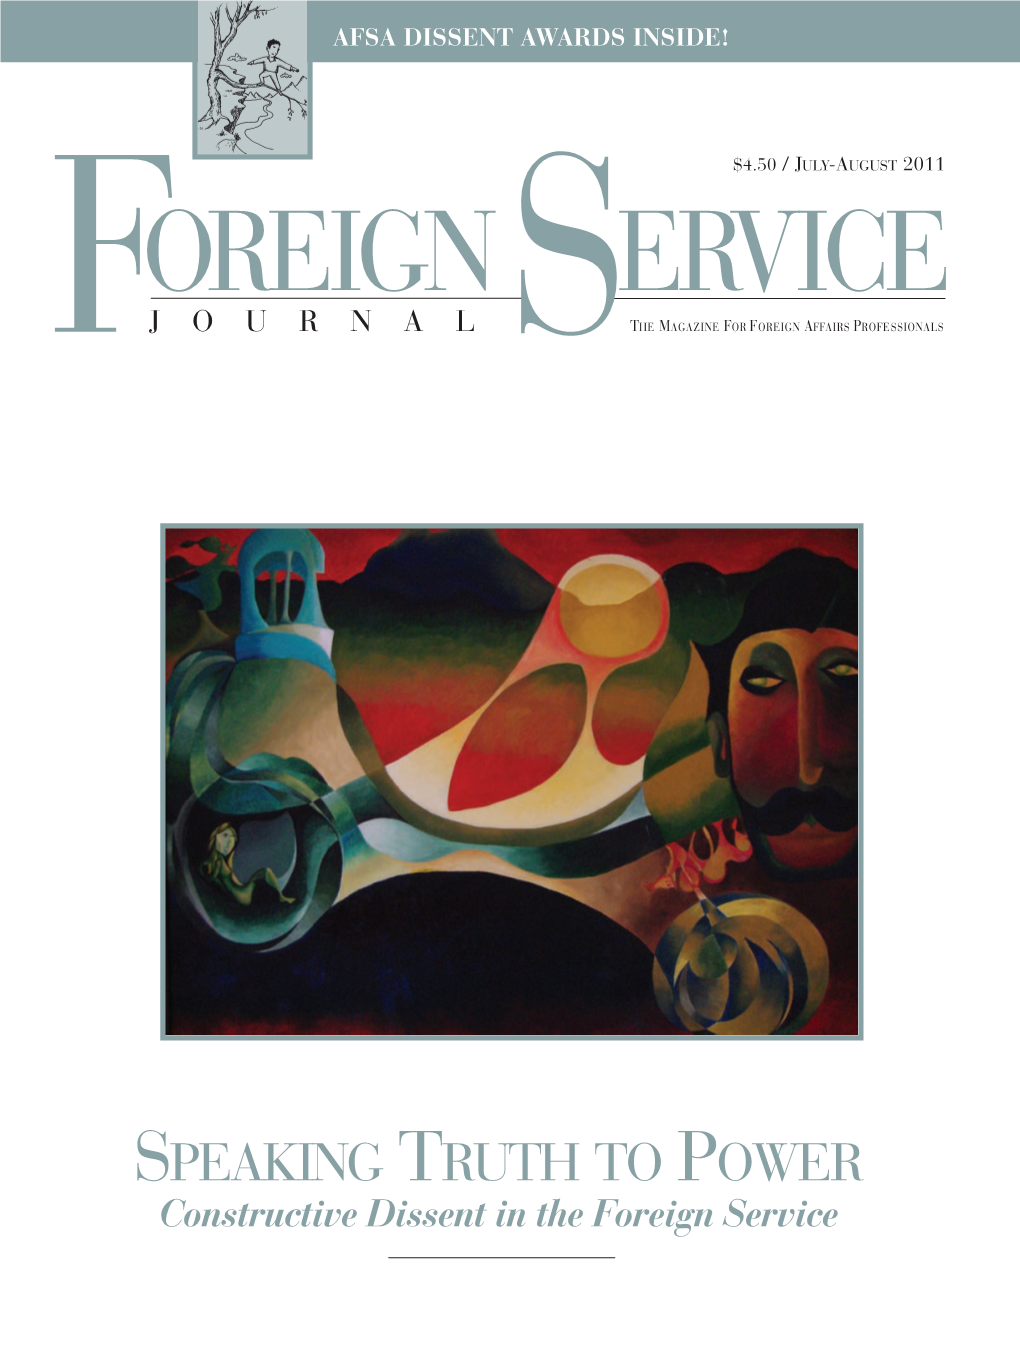 The Foreign Service Journal, July-August 2011